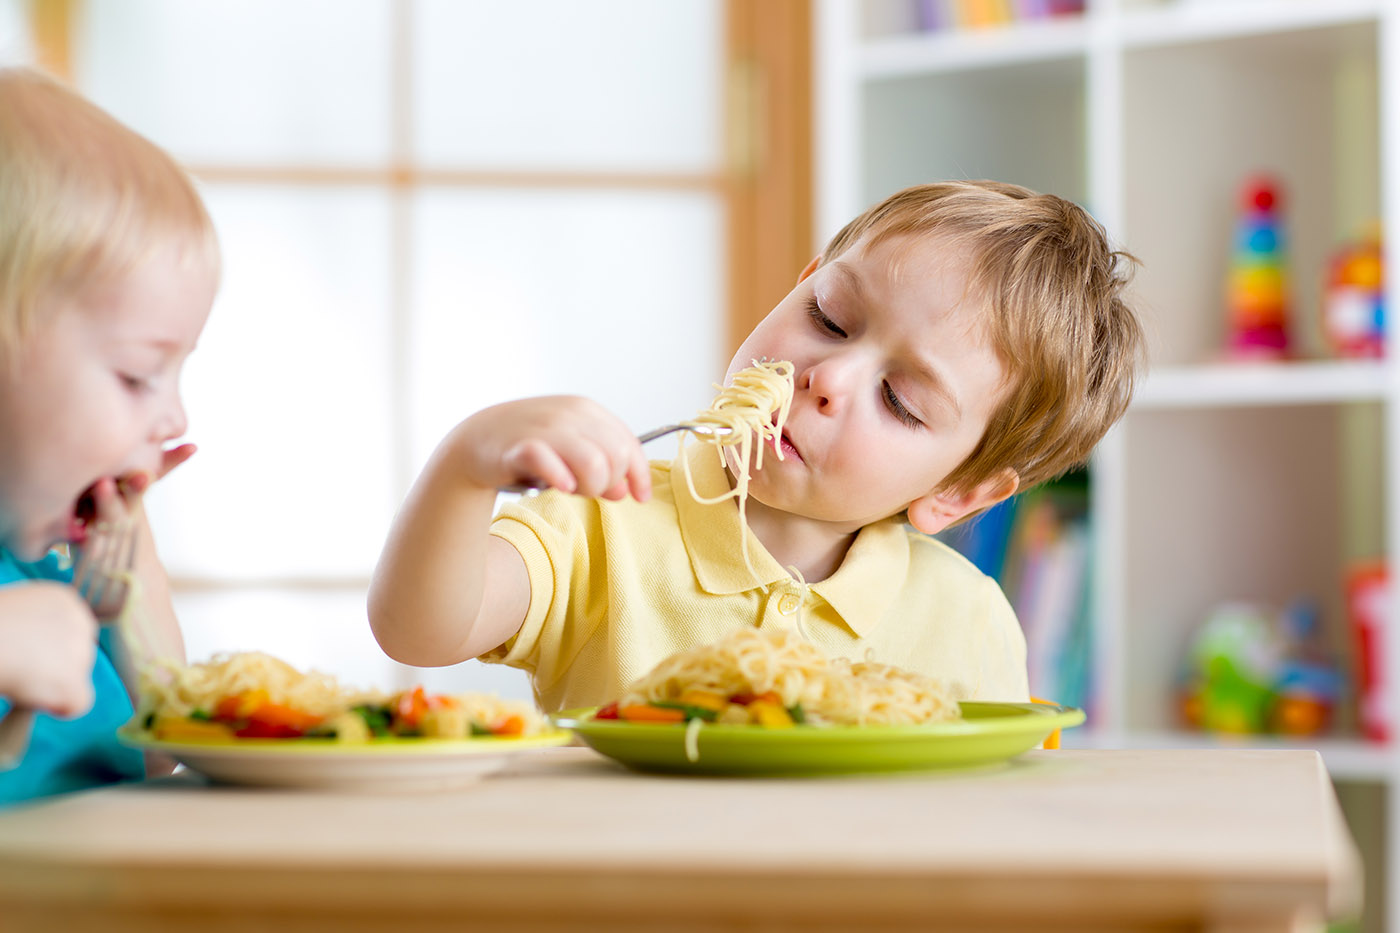 An Image of a Child Eating a Freshly Prepared Meal